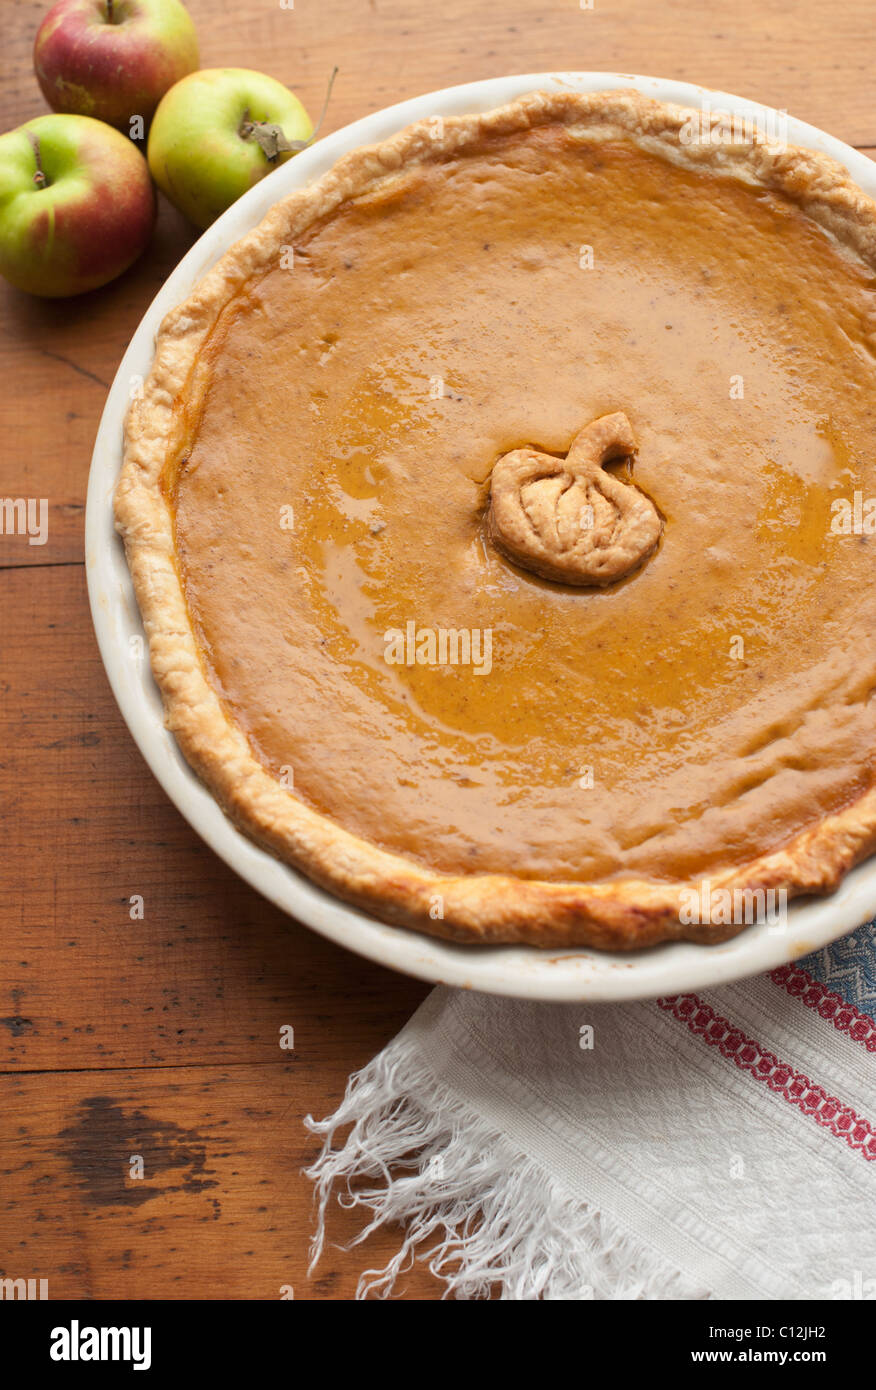 Close up of pumpkin pie and apples on table Stock Photo